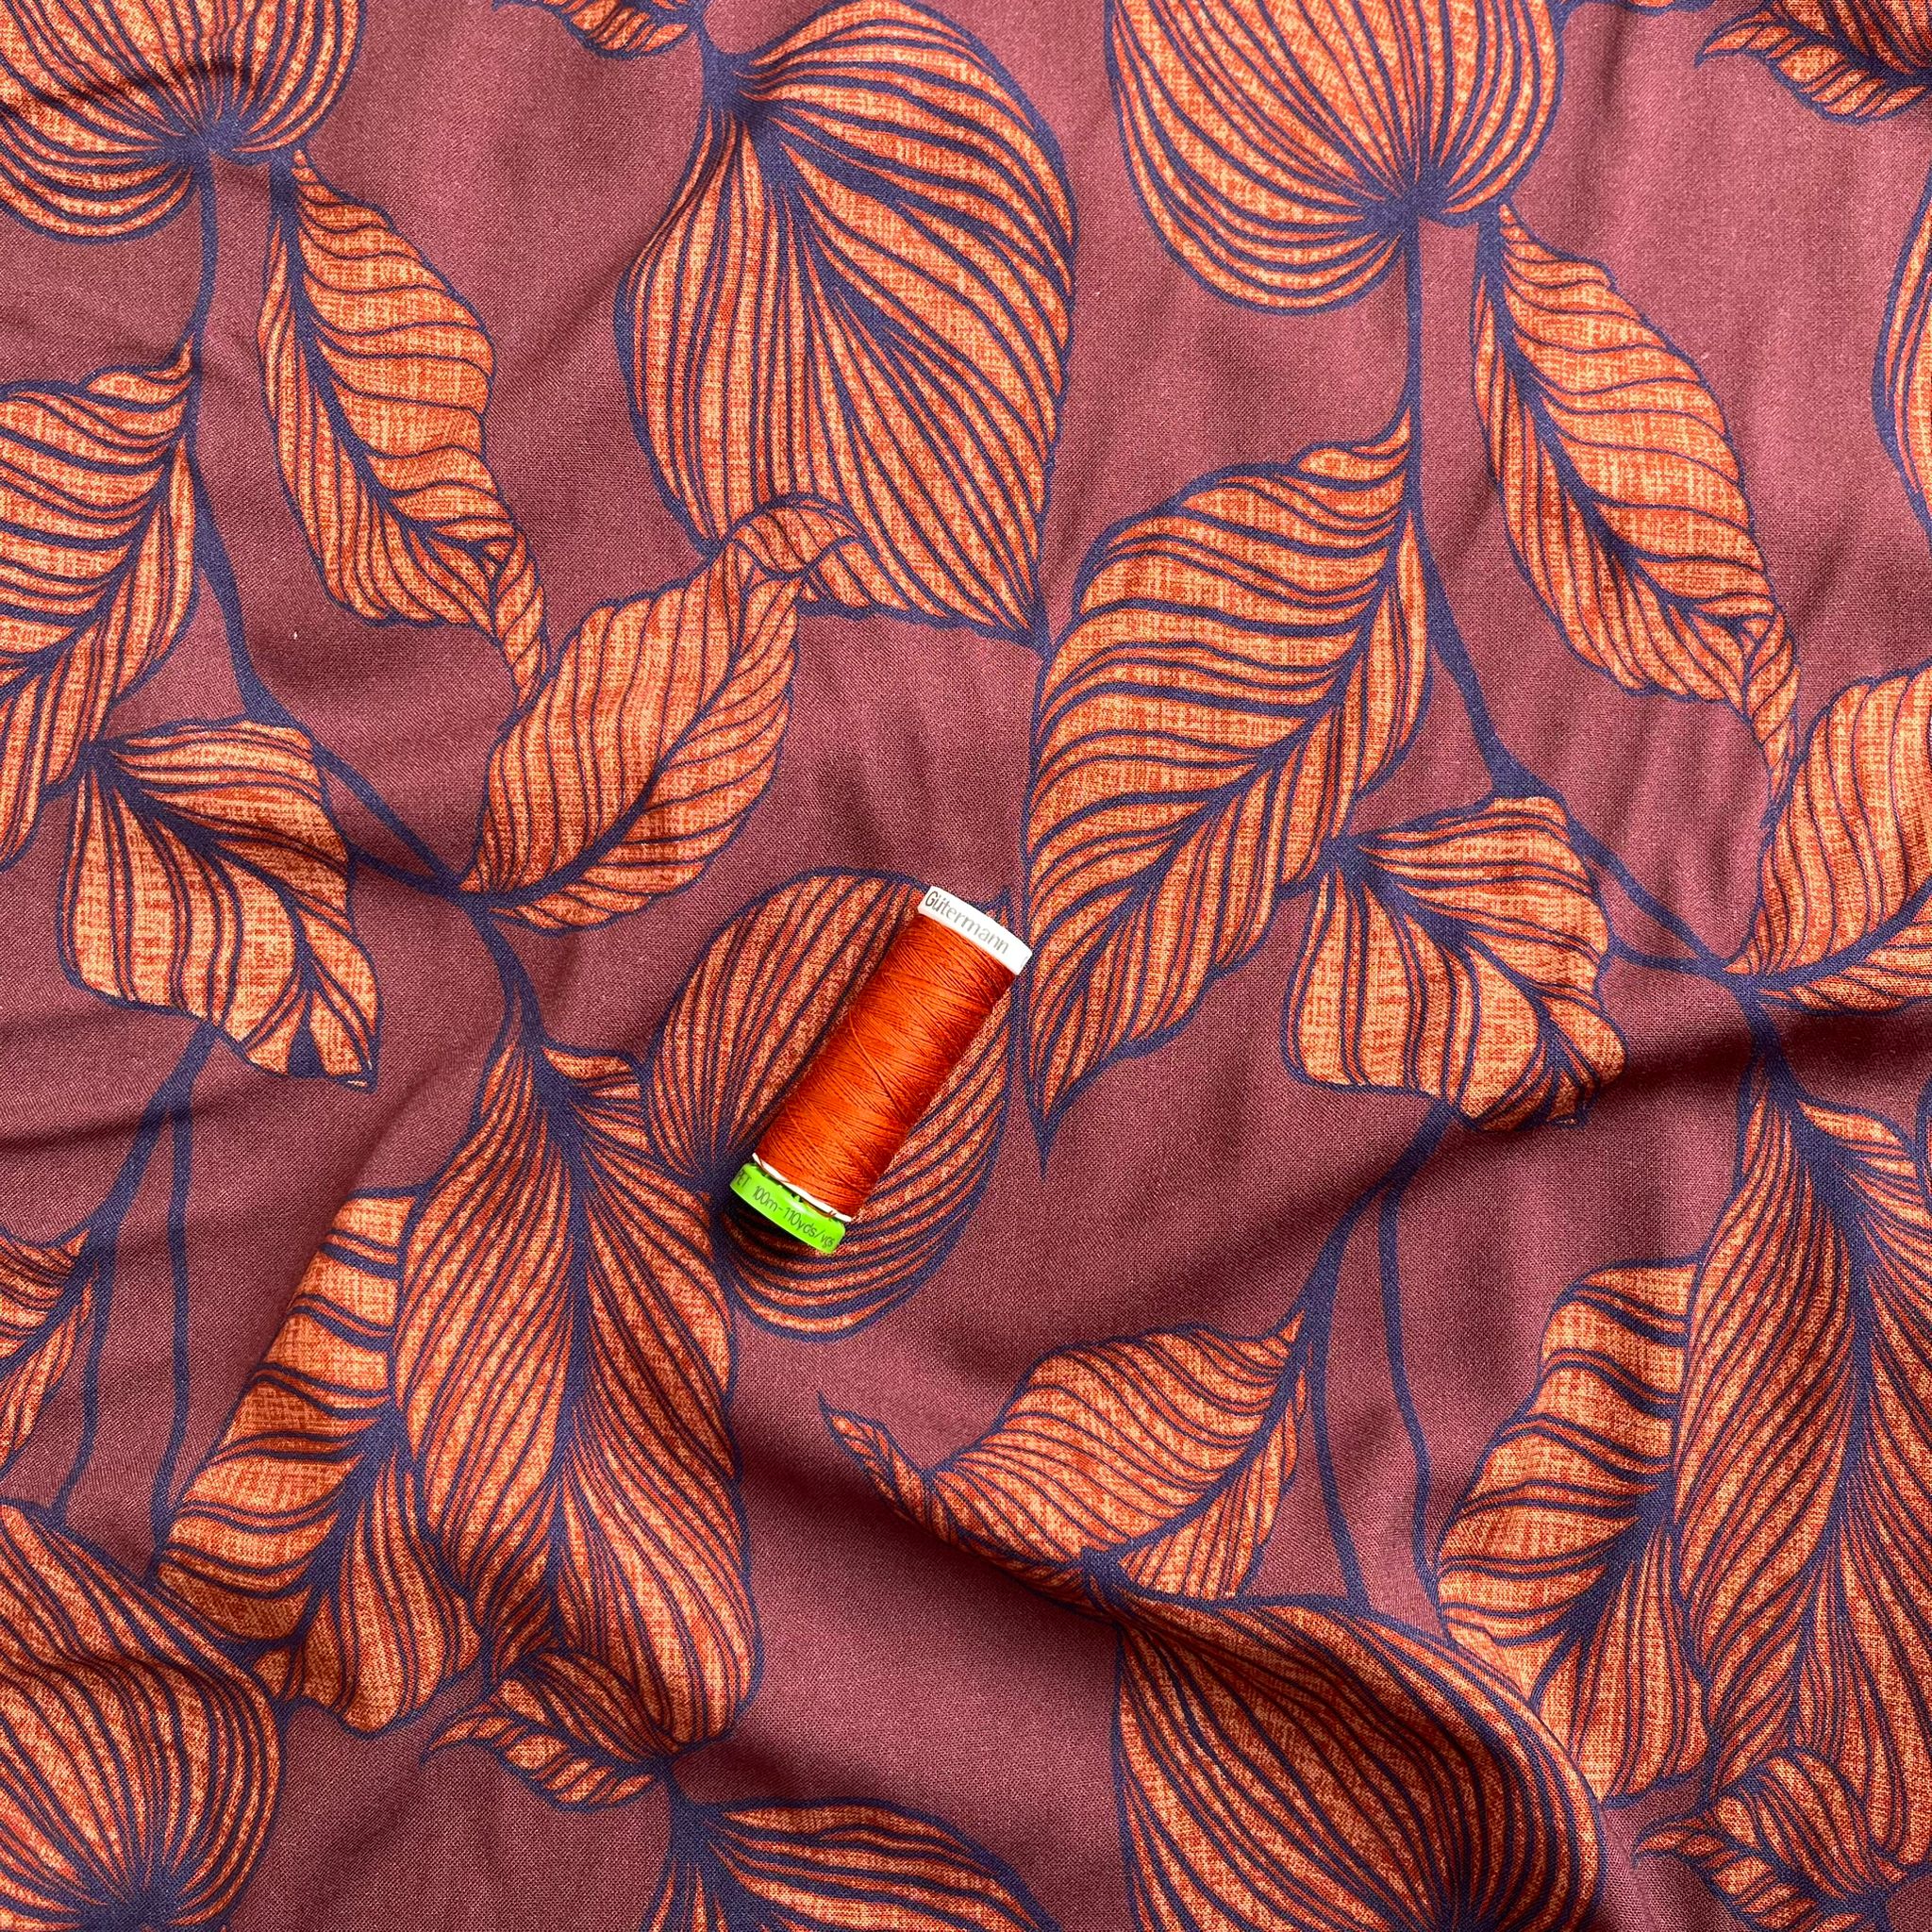 REMNANT 2.05 Metres - Deadstock Rust Leaves Viscose Fabric